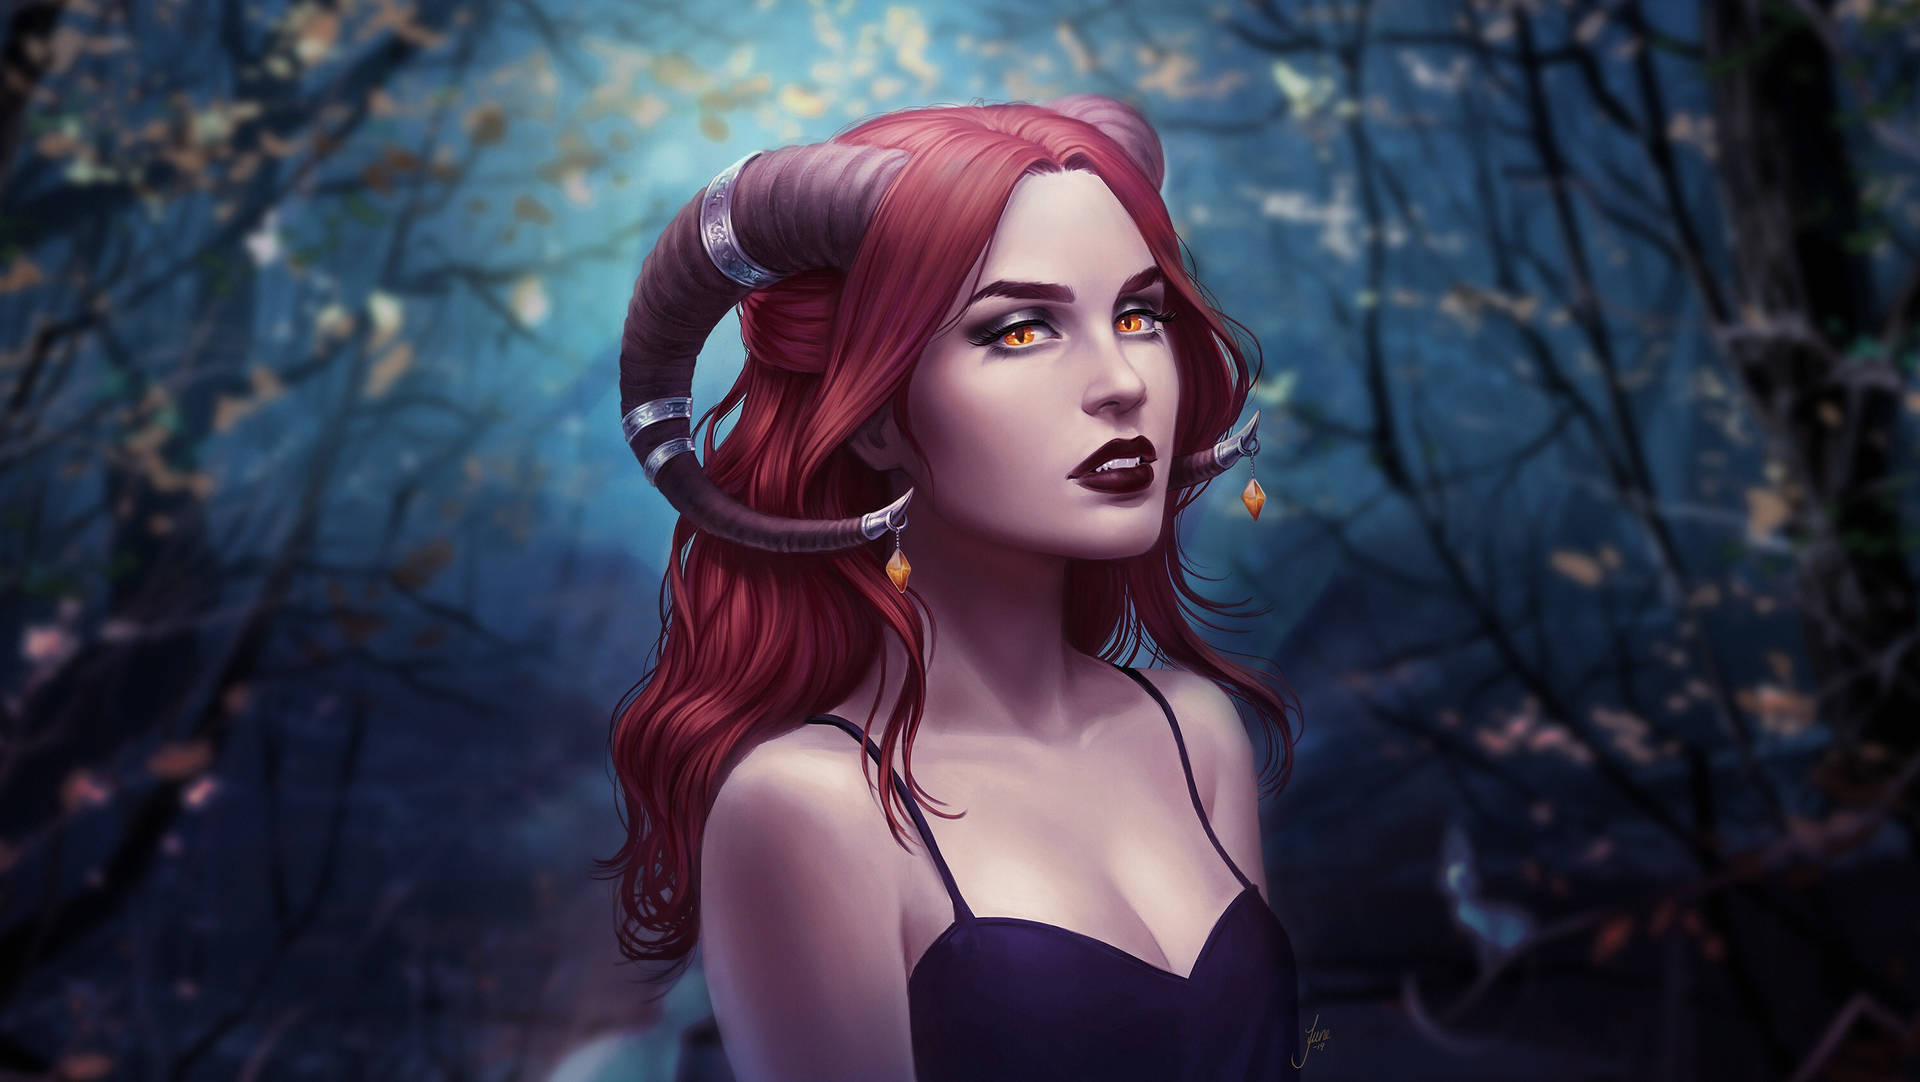 Redhead Succubus In Forest Wallpaper